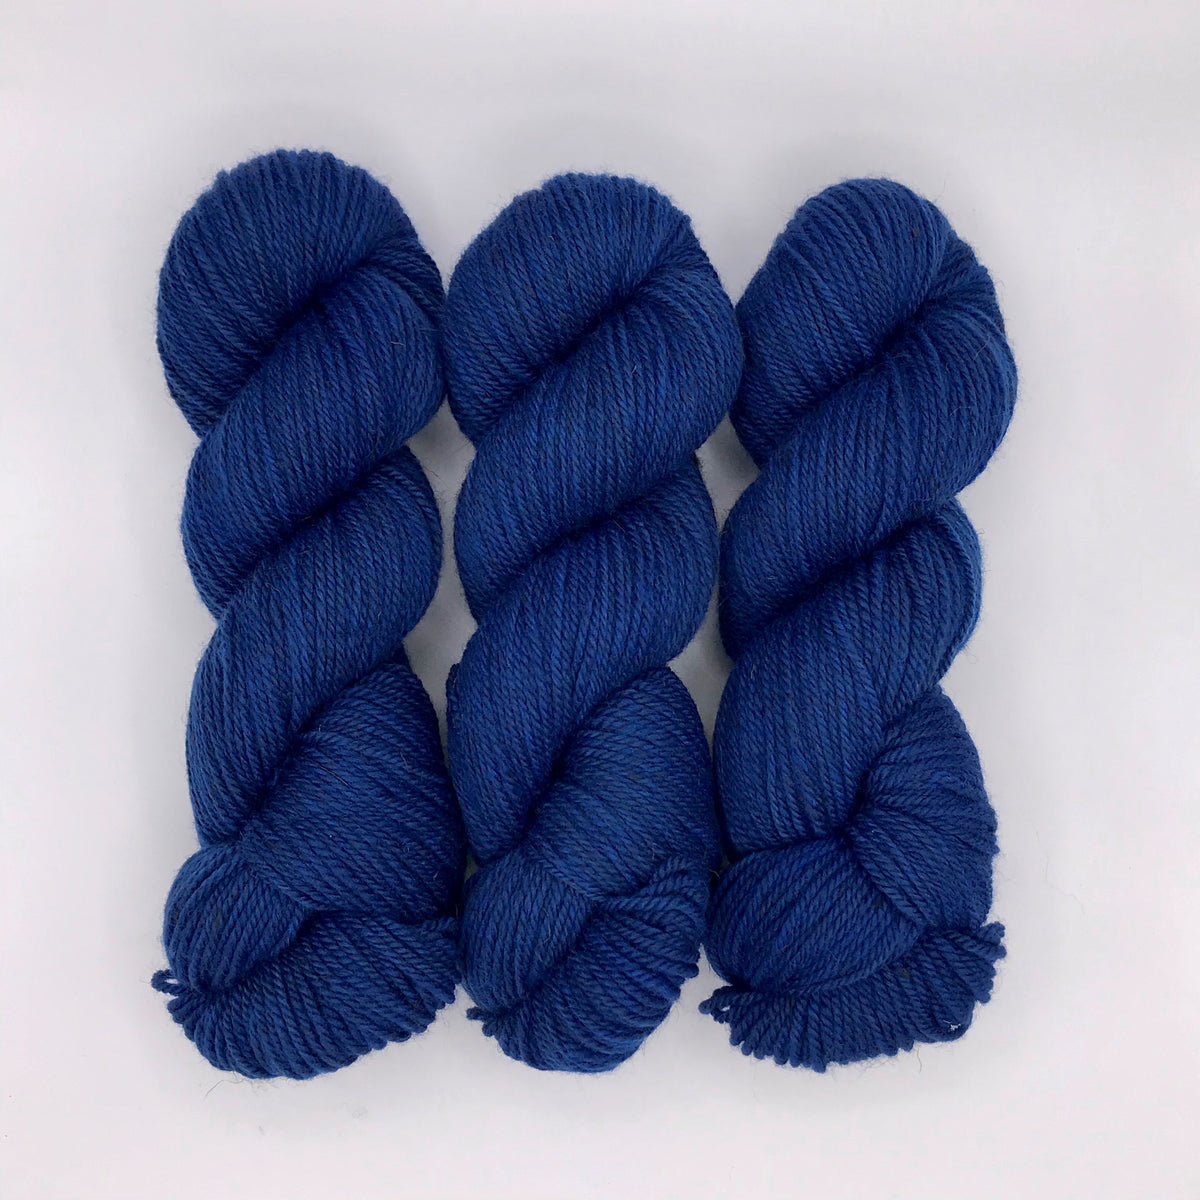 Classic Blue-Lascaux Worsted - Dyed Stock